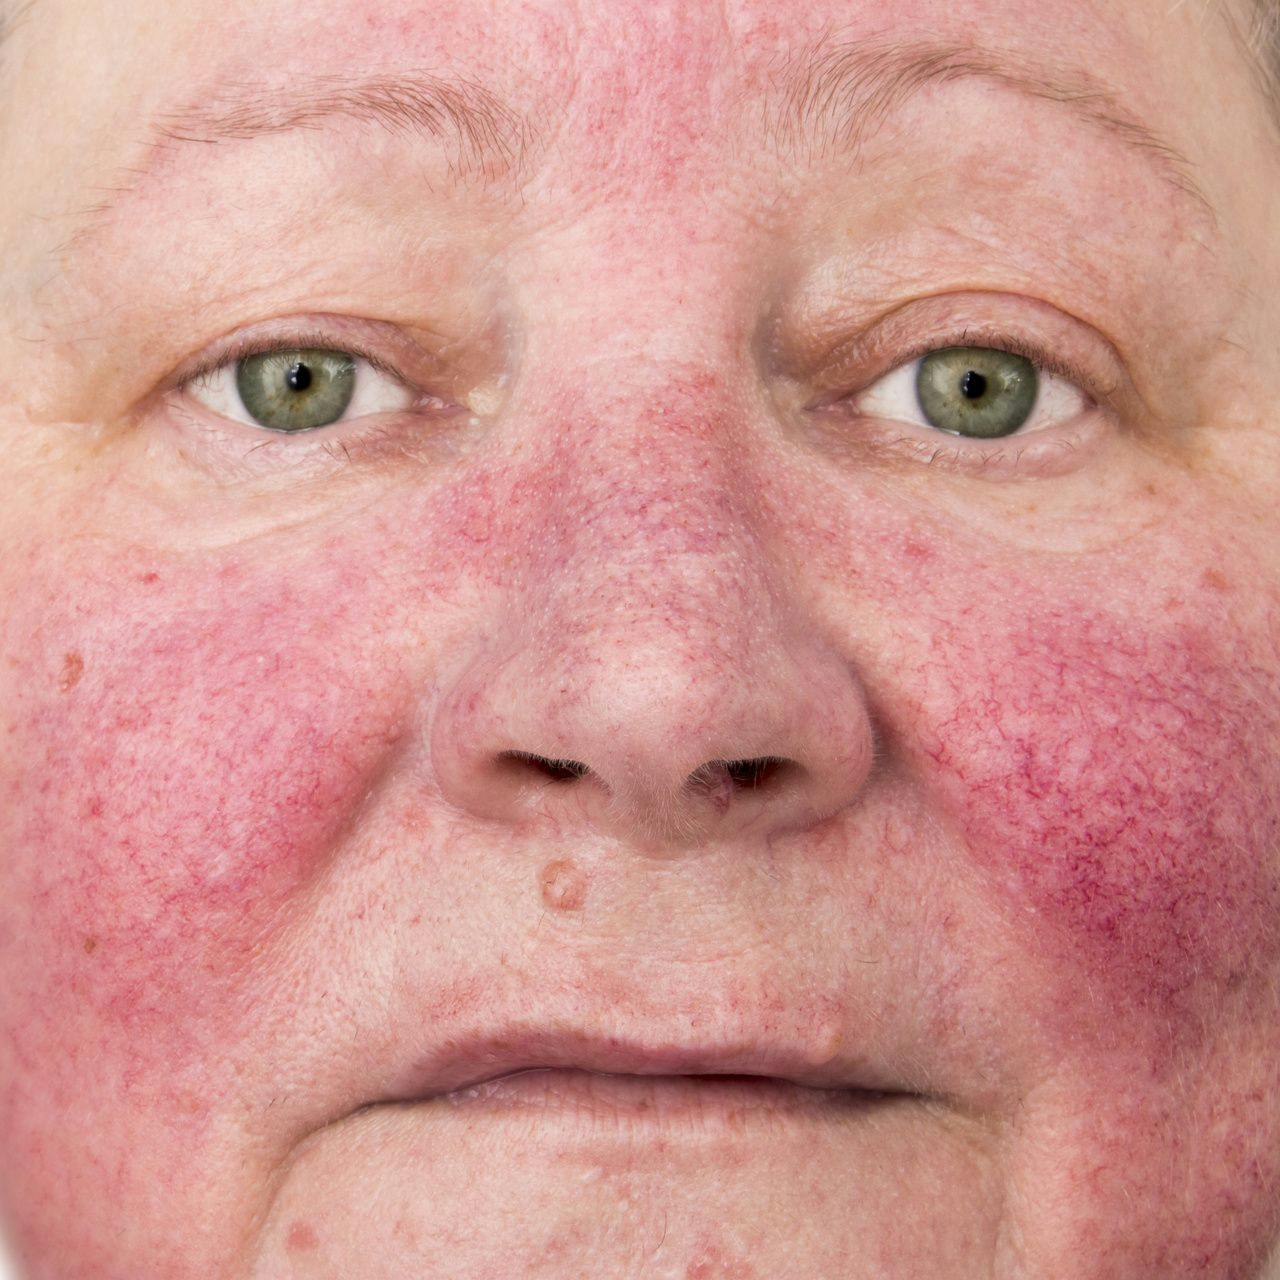 Image of patients with rosacea